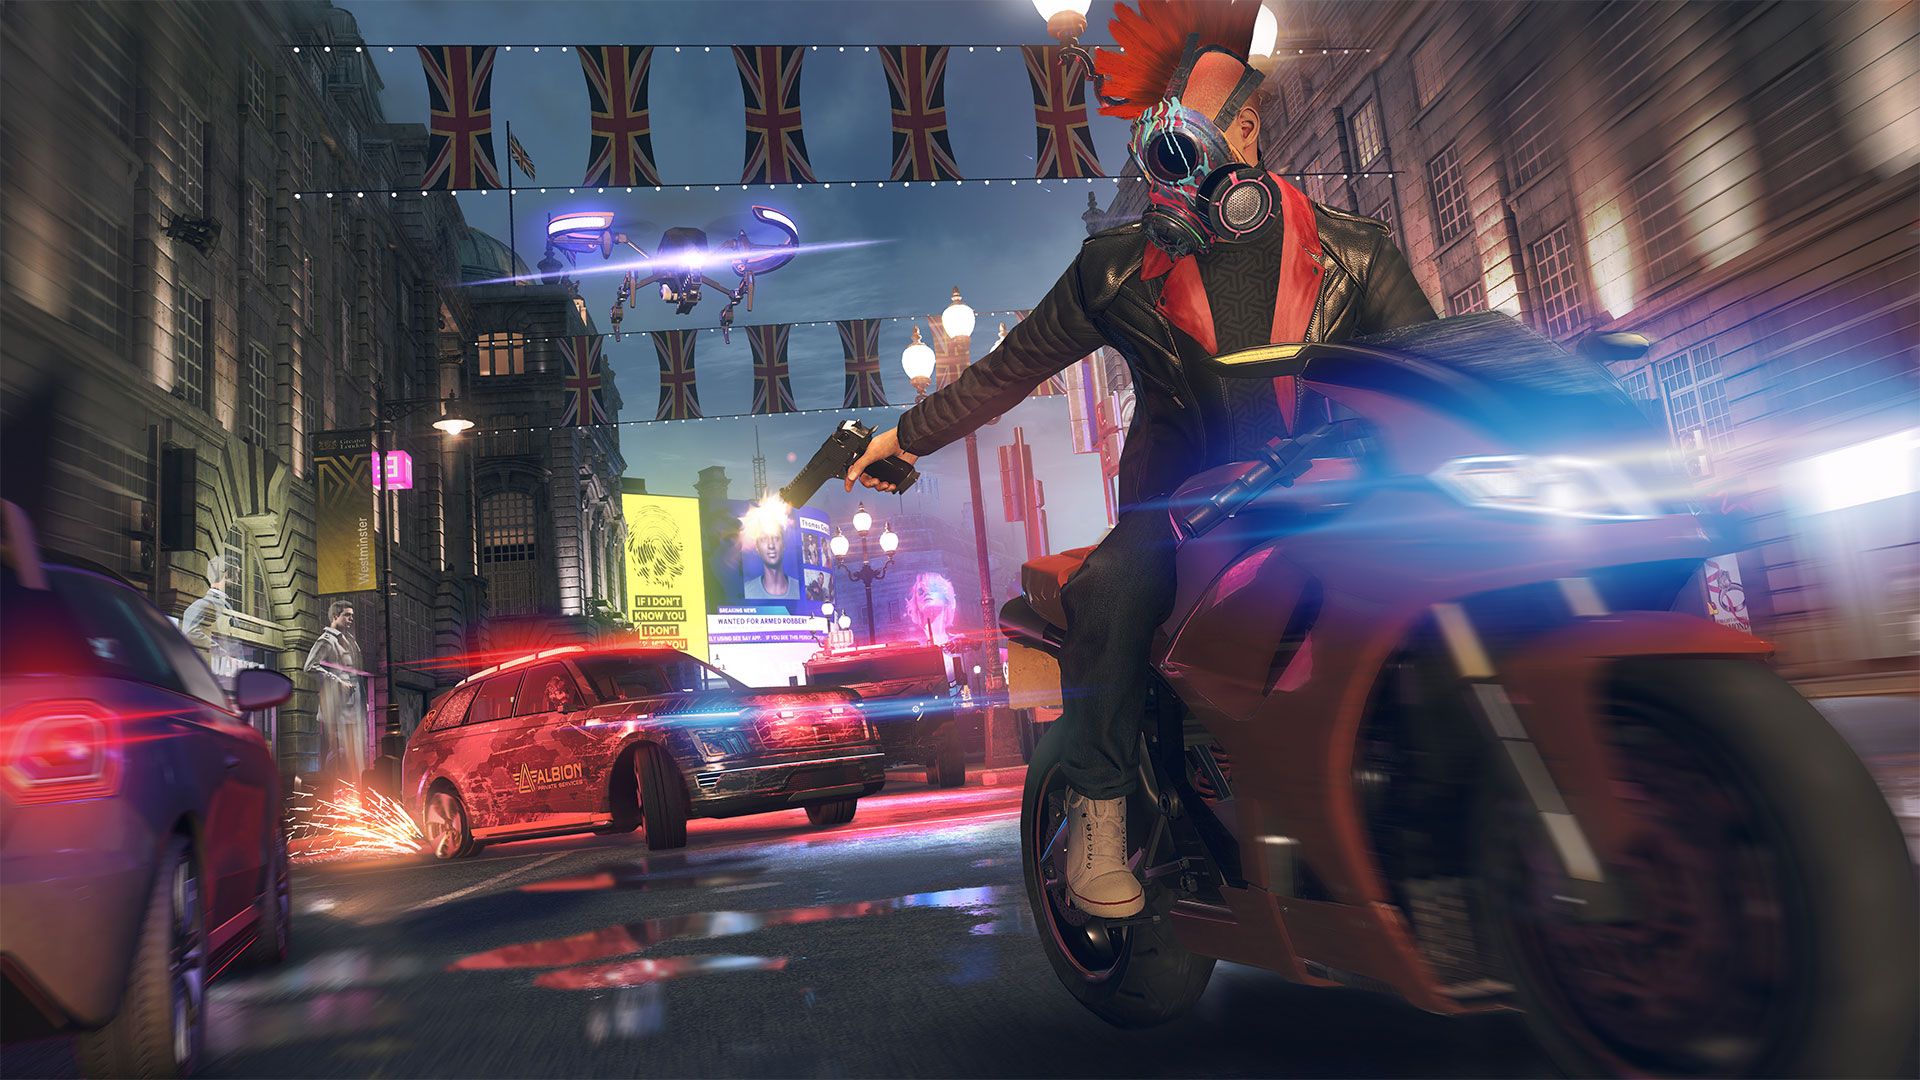 Watch Dogs: Legion Trainer - FLiNG Trainer - PC Game Cheats and Mods